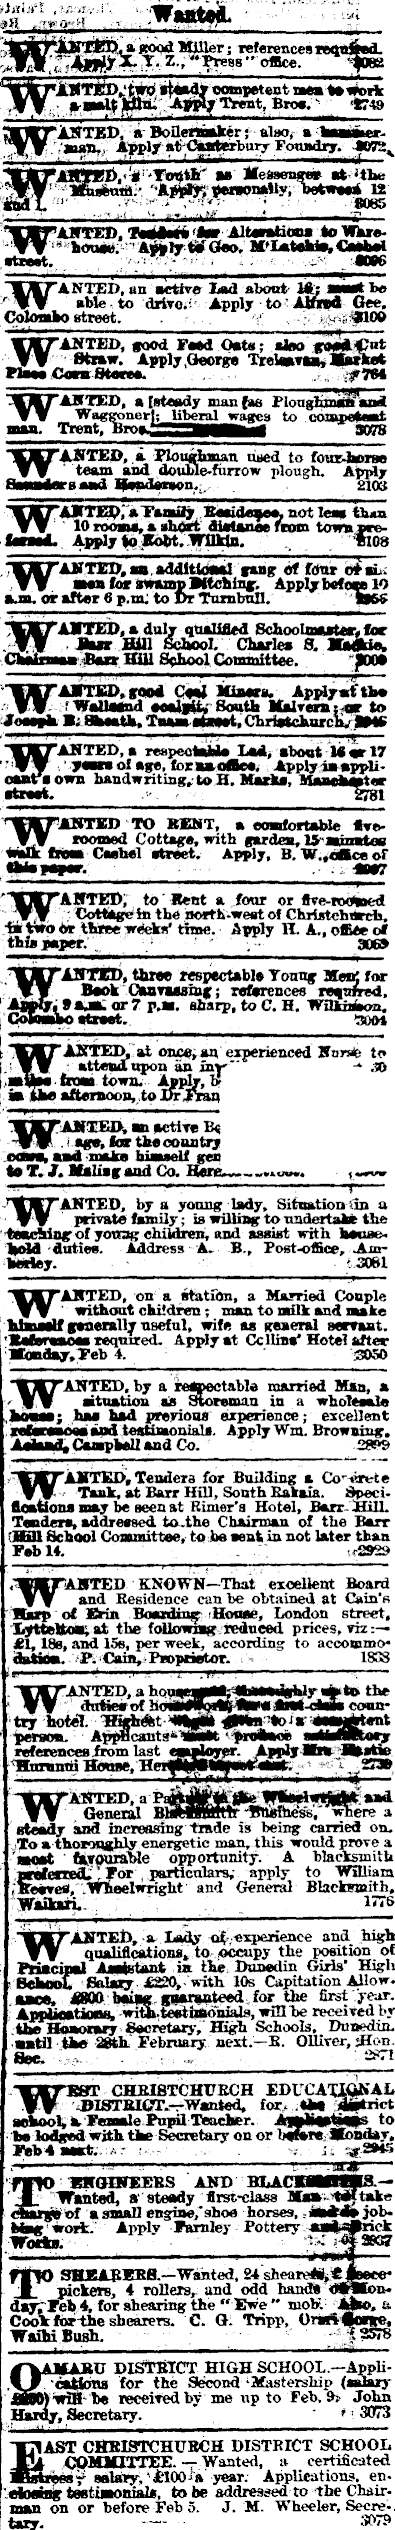 Papers Past Newspapers Lyttelton Times 4 February 1878 Page 1 Advertisements Column 8